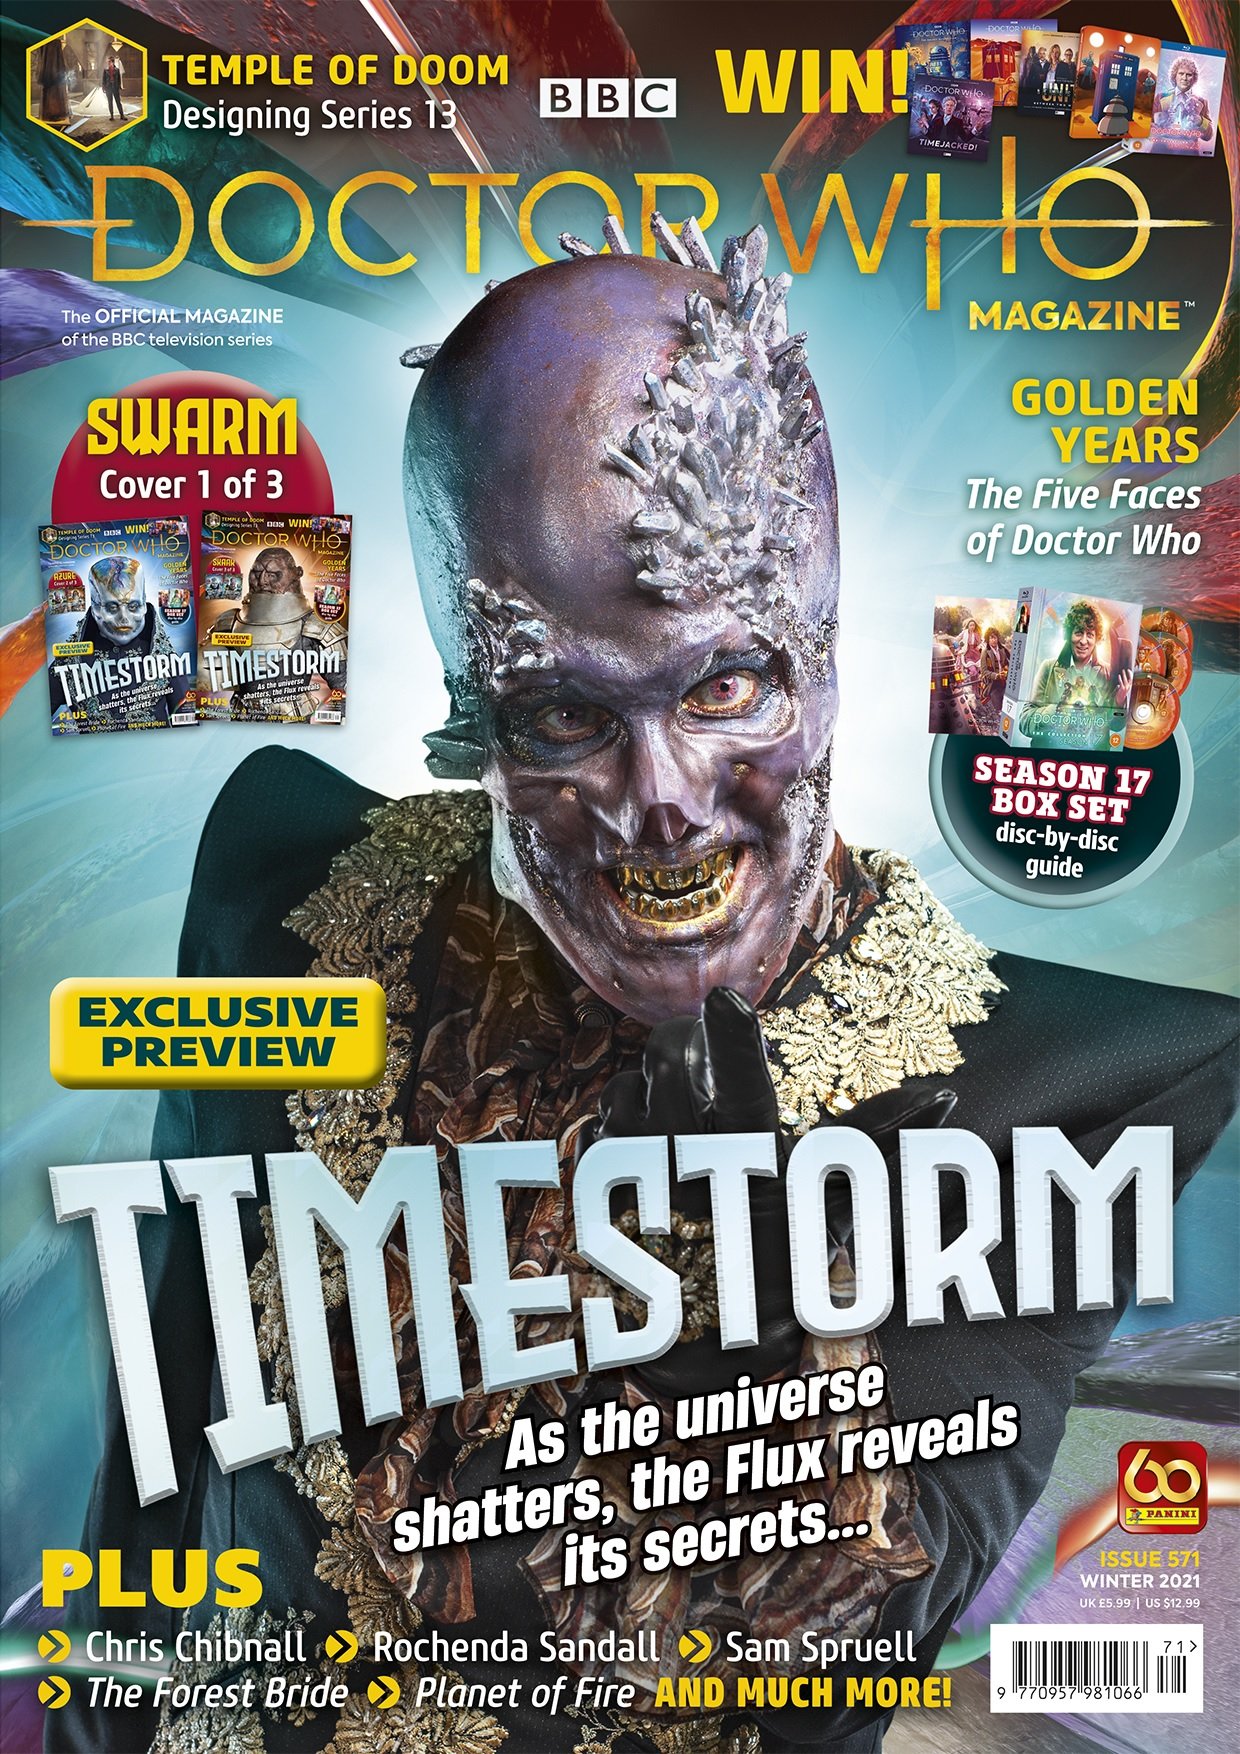 Out Now: Doctor Who Magazine #571